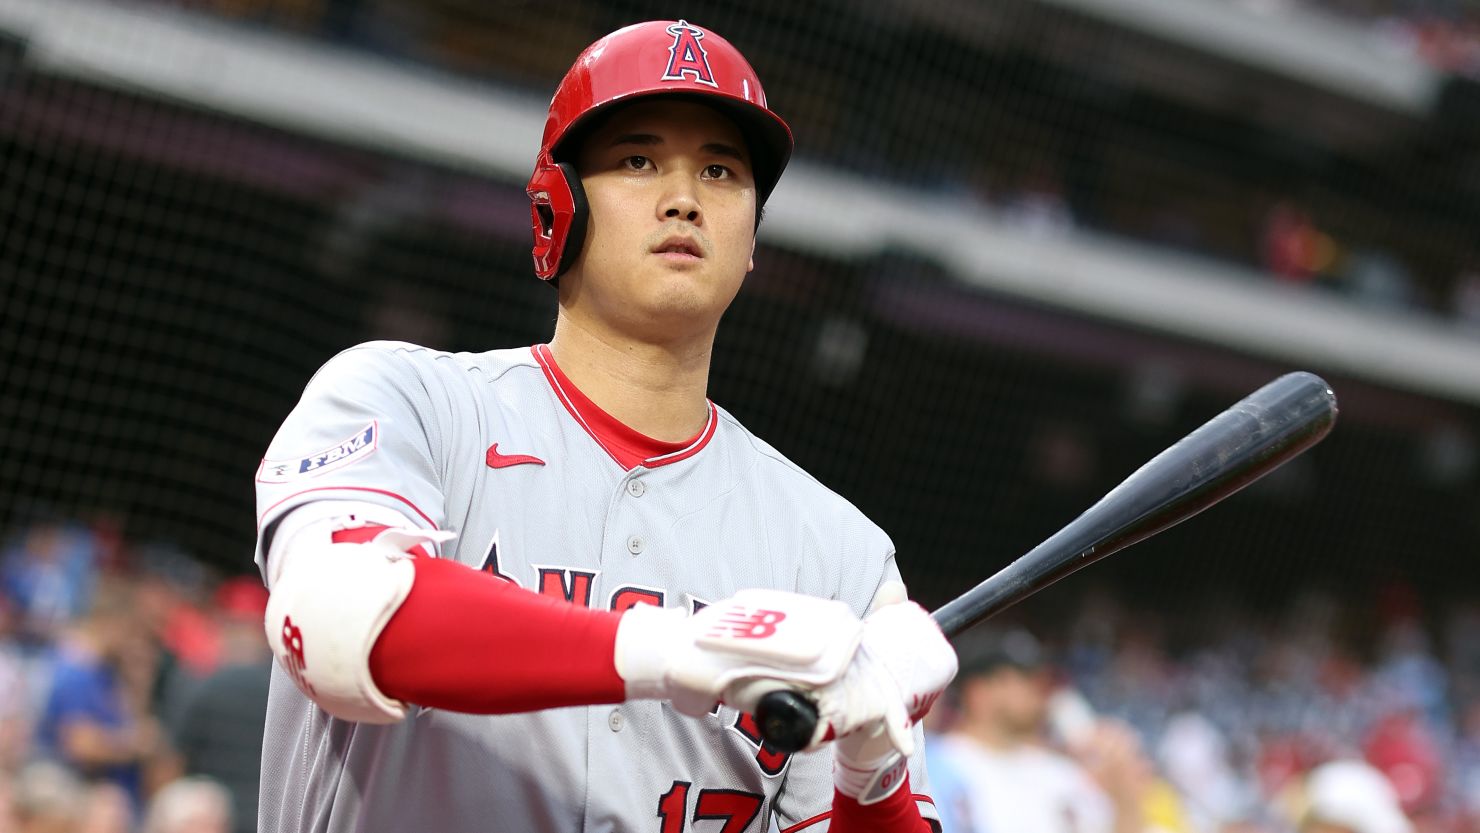 Los Angeles Angels star Shohei Ohtani still led the American League in home runs as of Tuesday, despite being absent from the lineup since September 3.